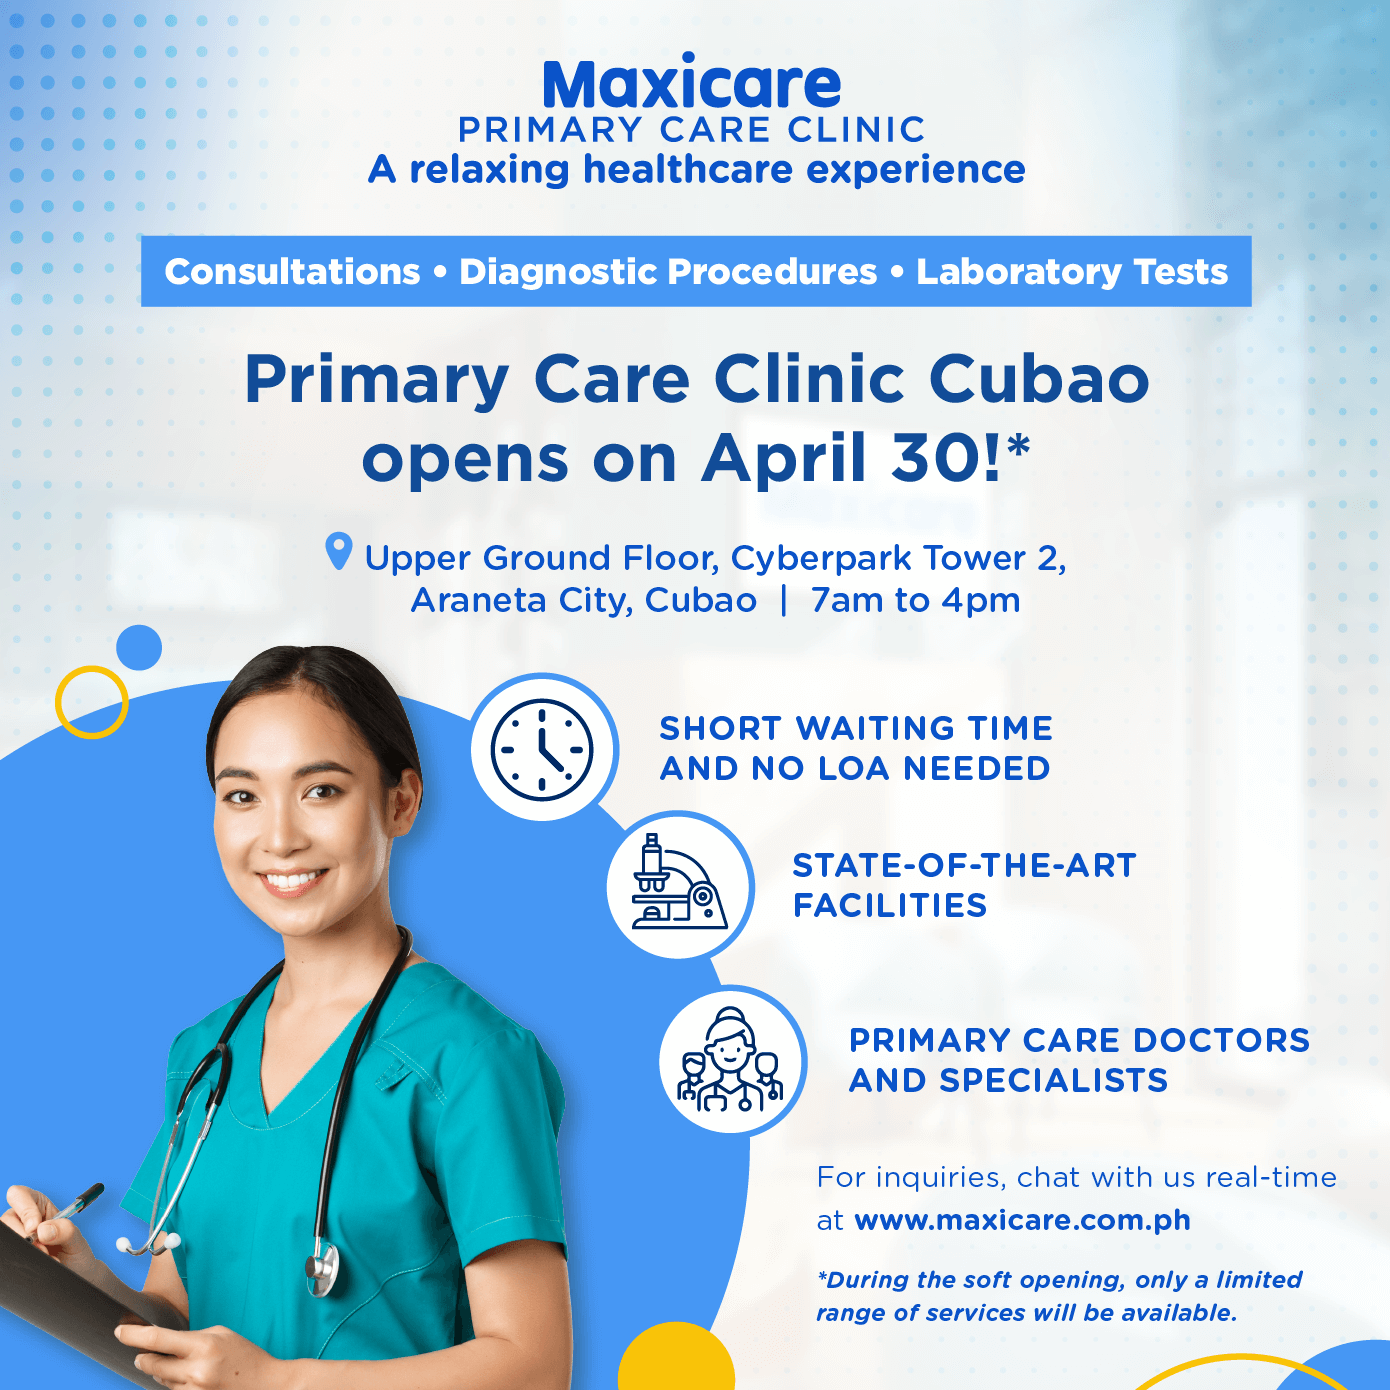 Maxicare Primary Care Clinic Cubao is Opening on April 30!